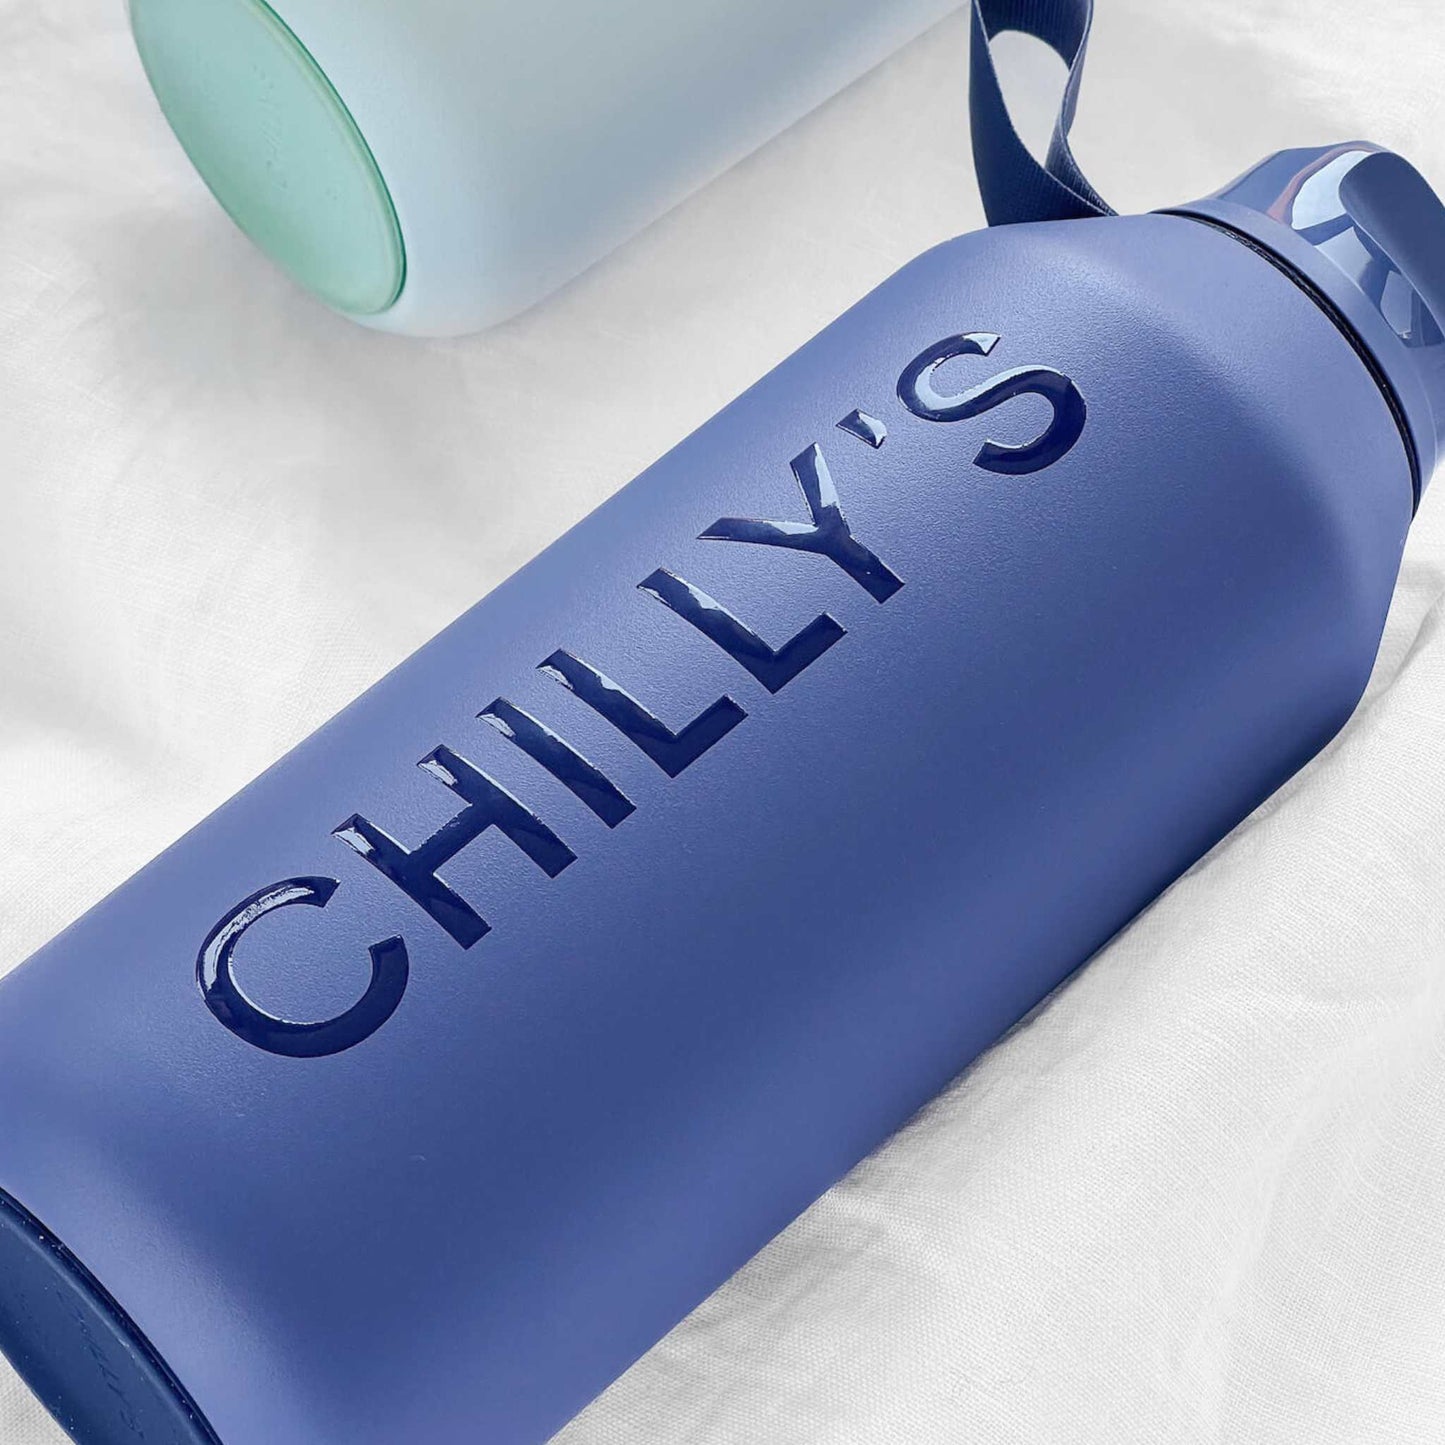 Chilly's Bottle - Pastel Green